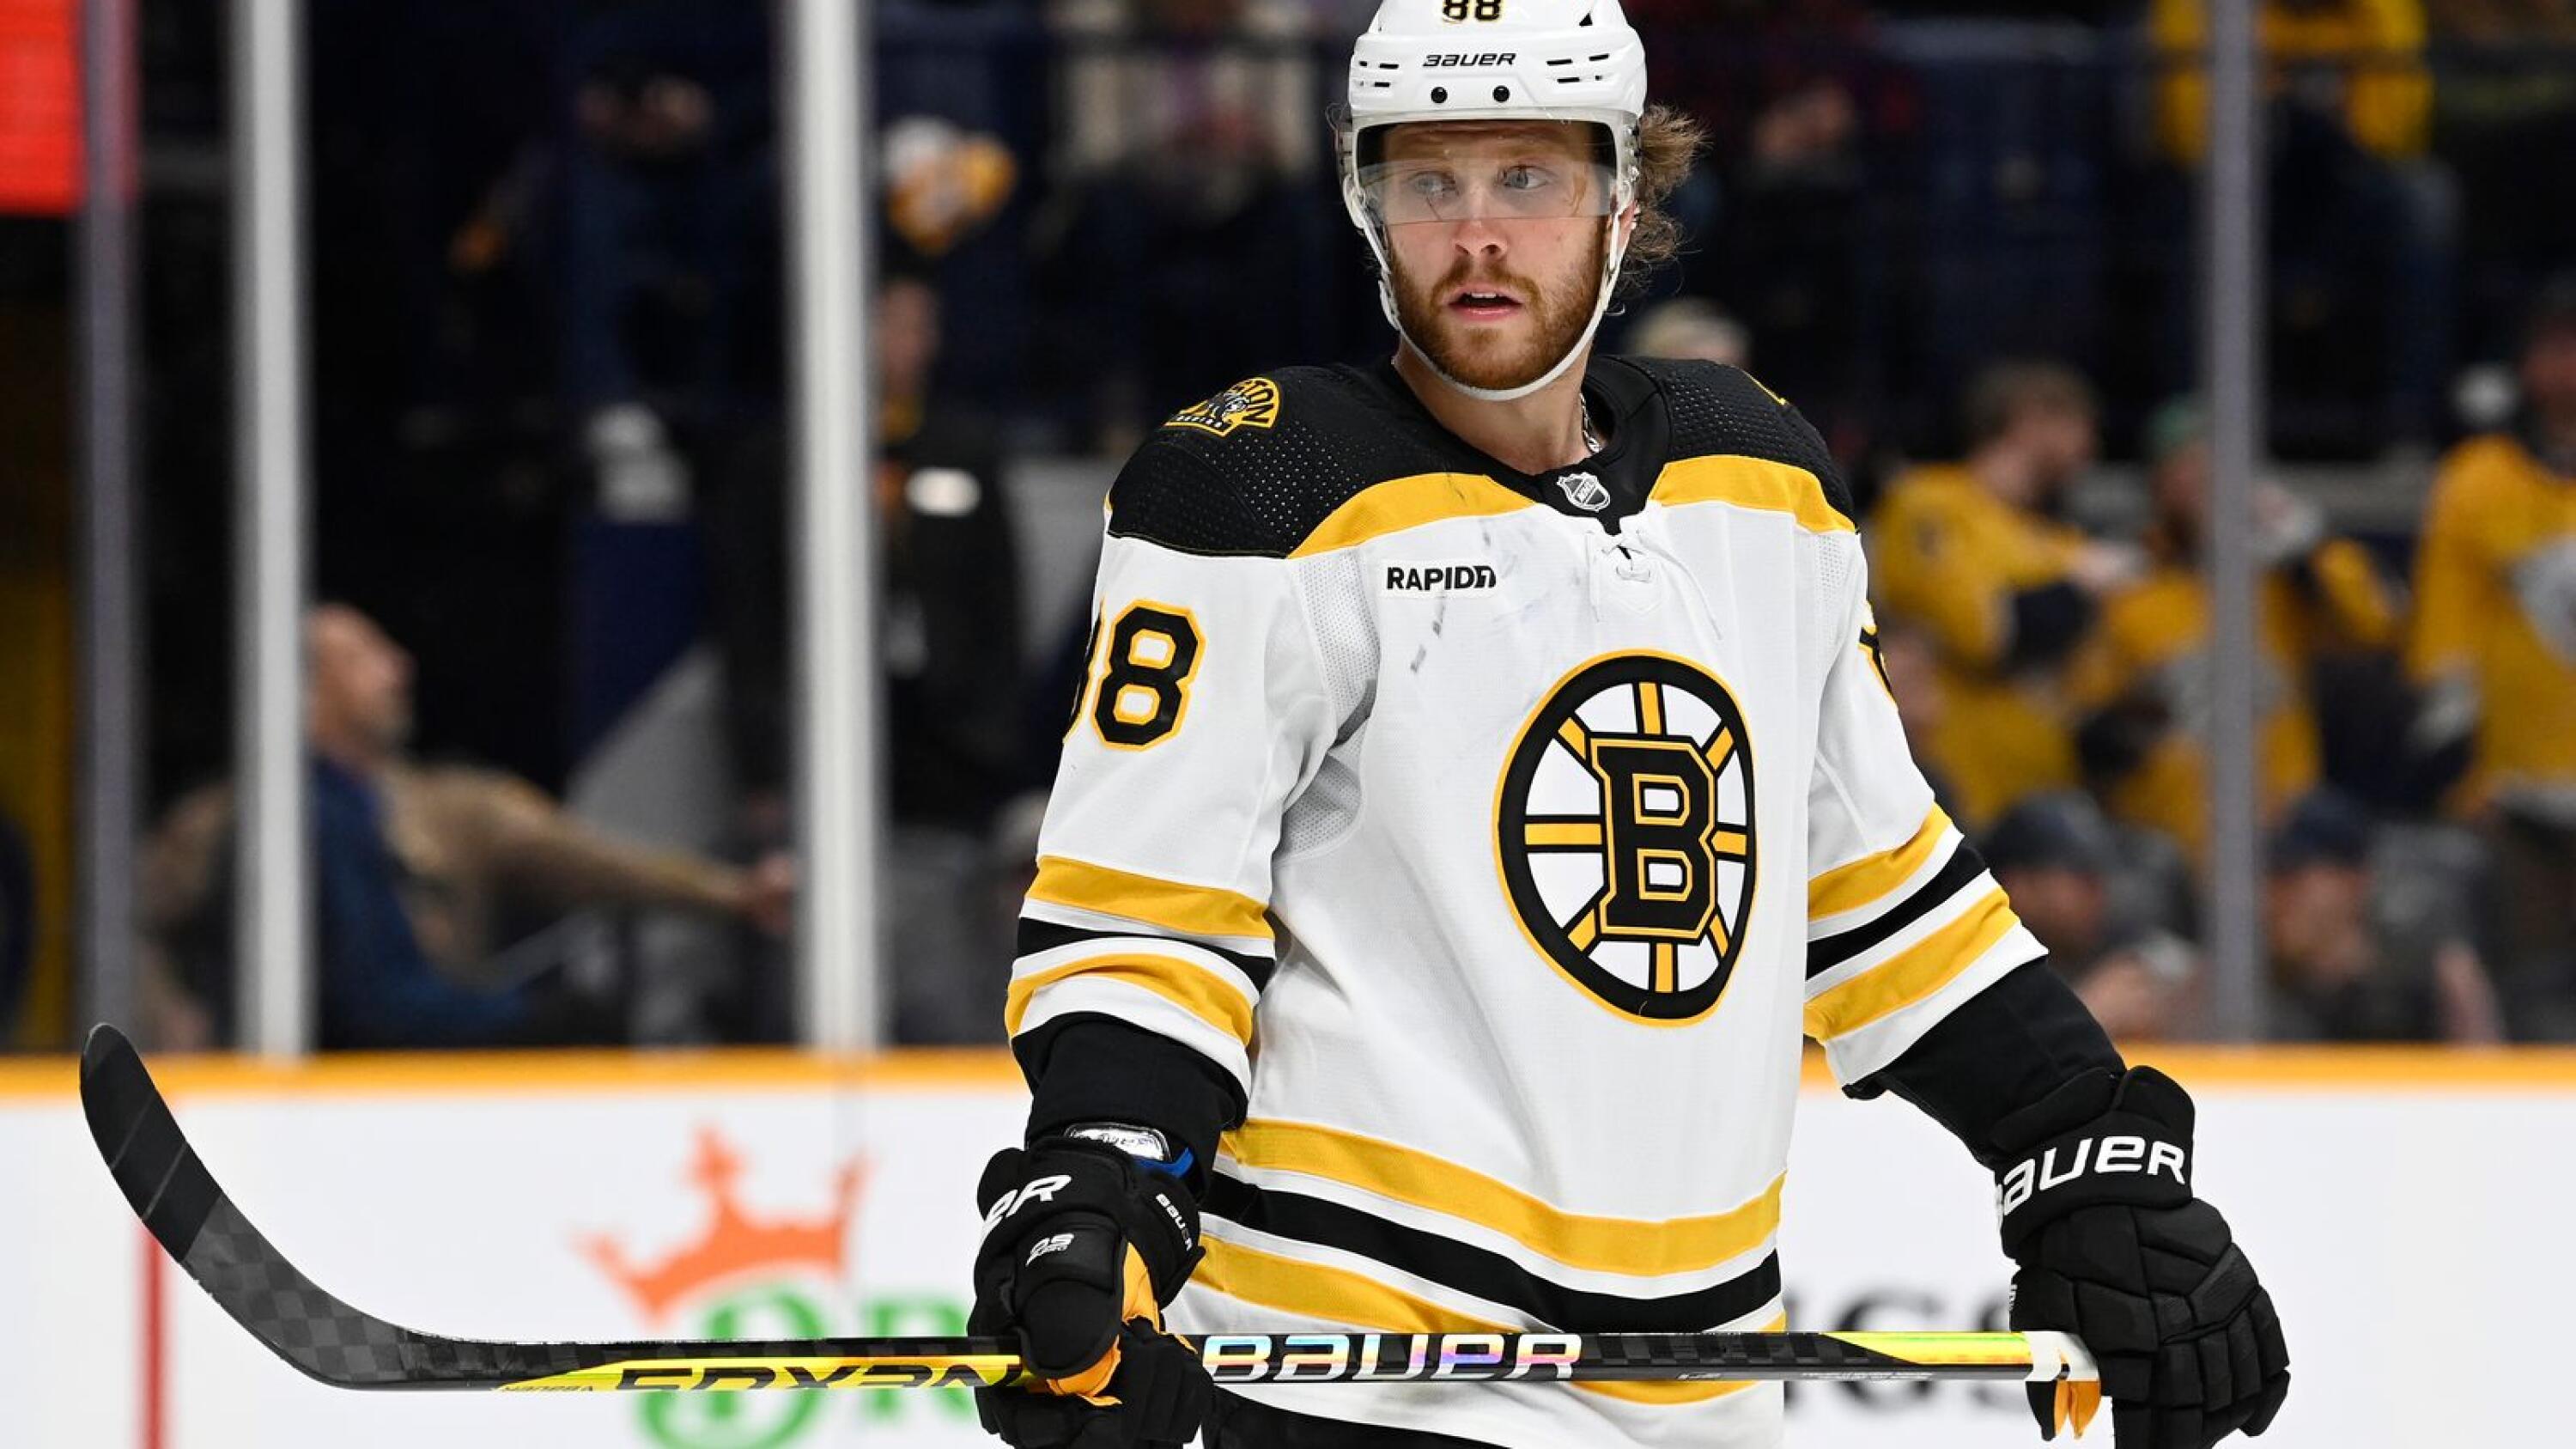 This milestone by the Bruins' Nick Foligno will mark a grand